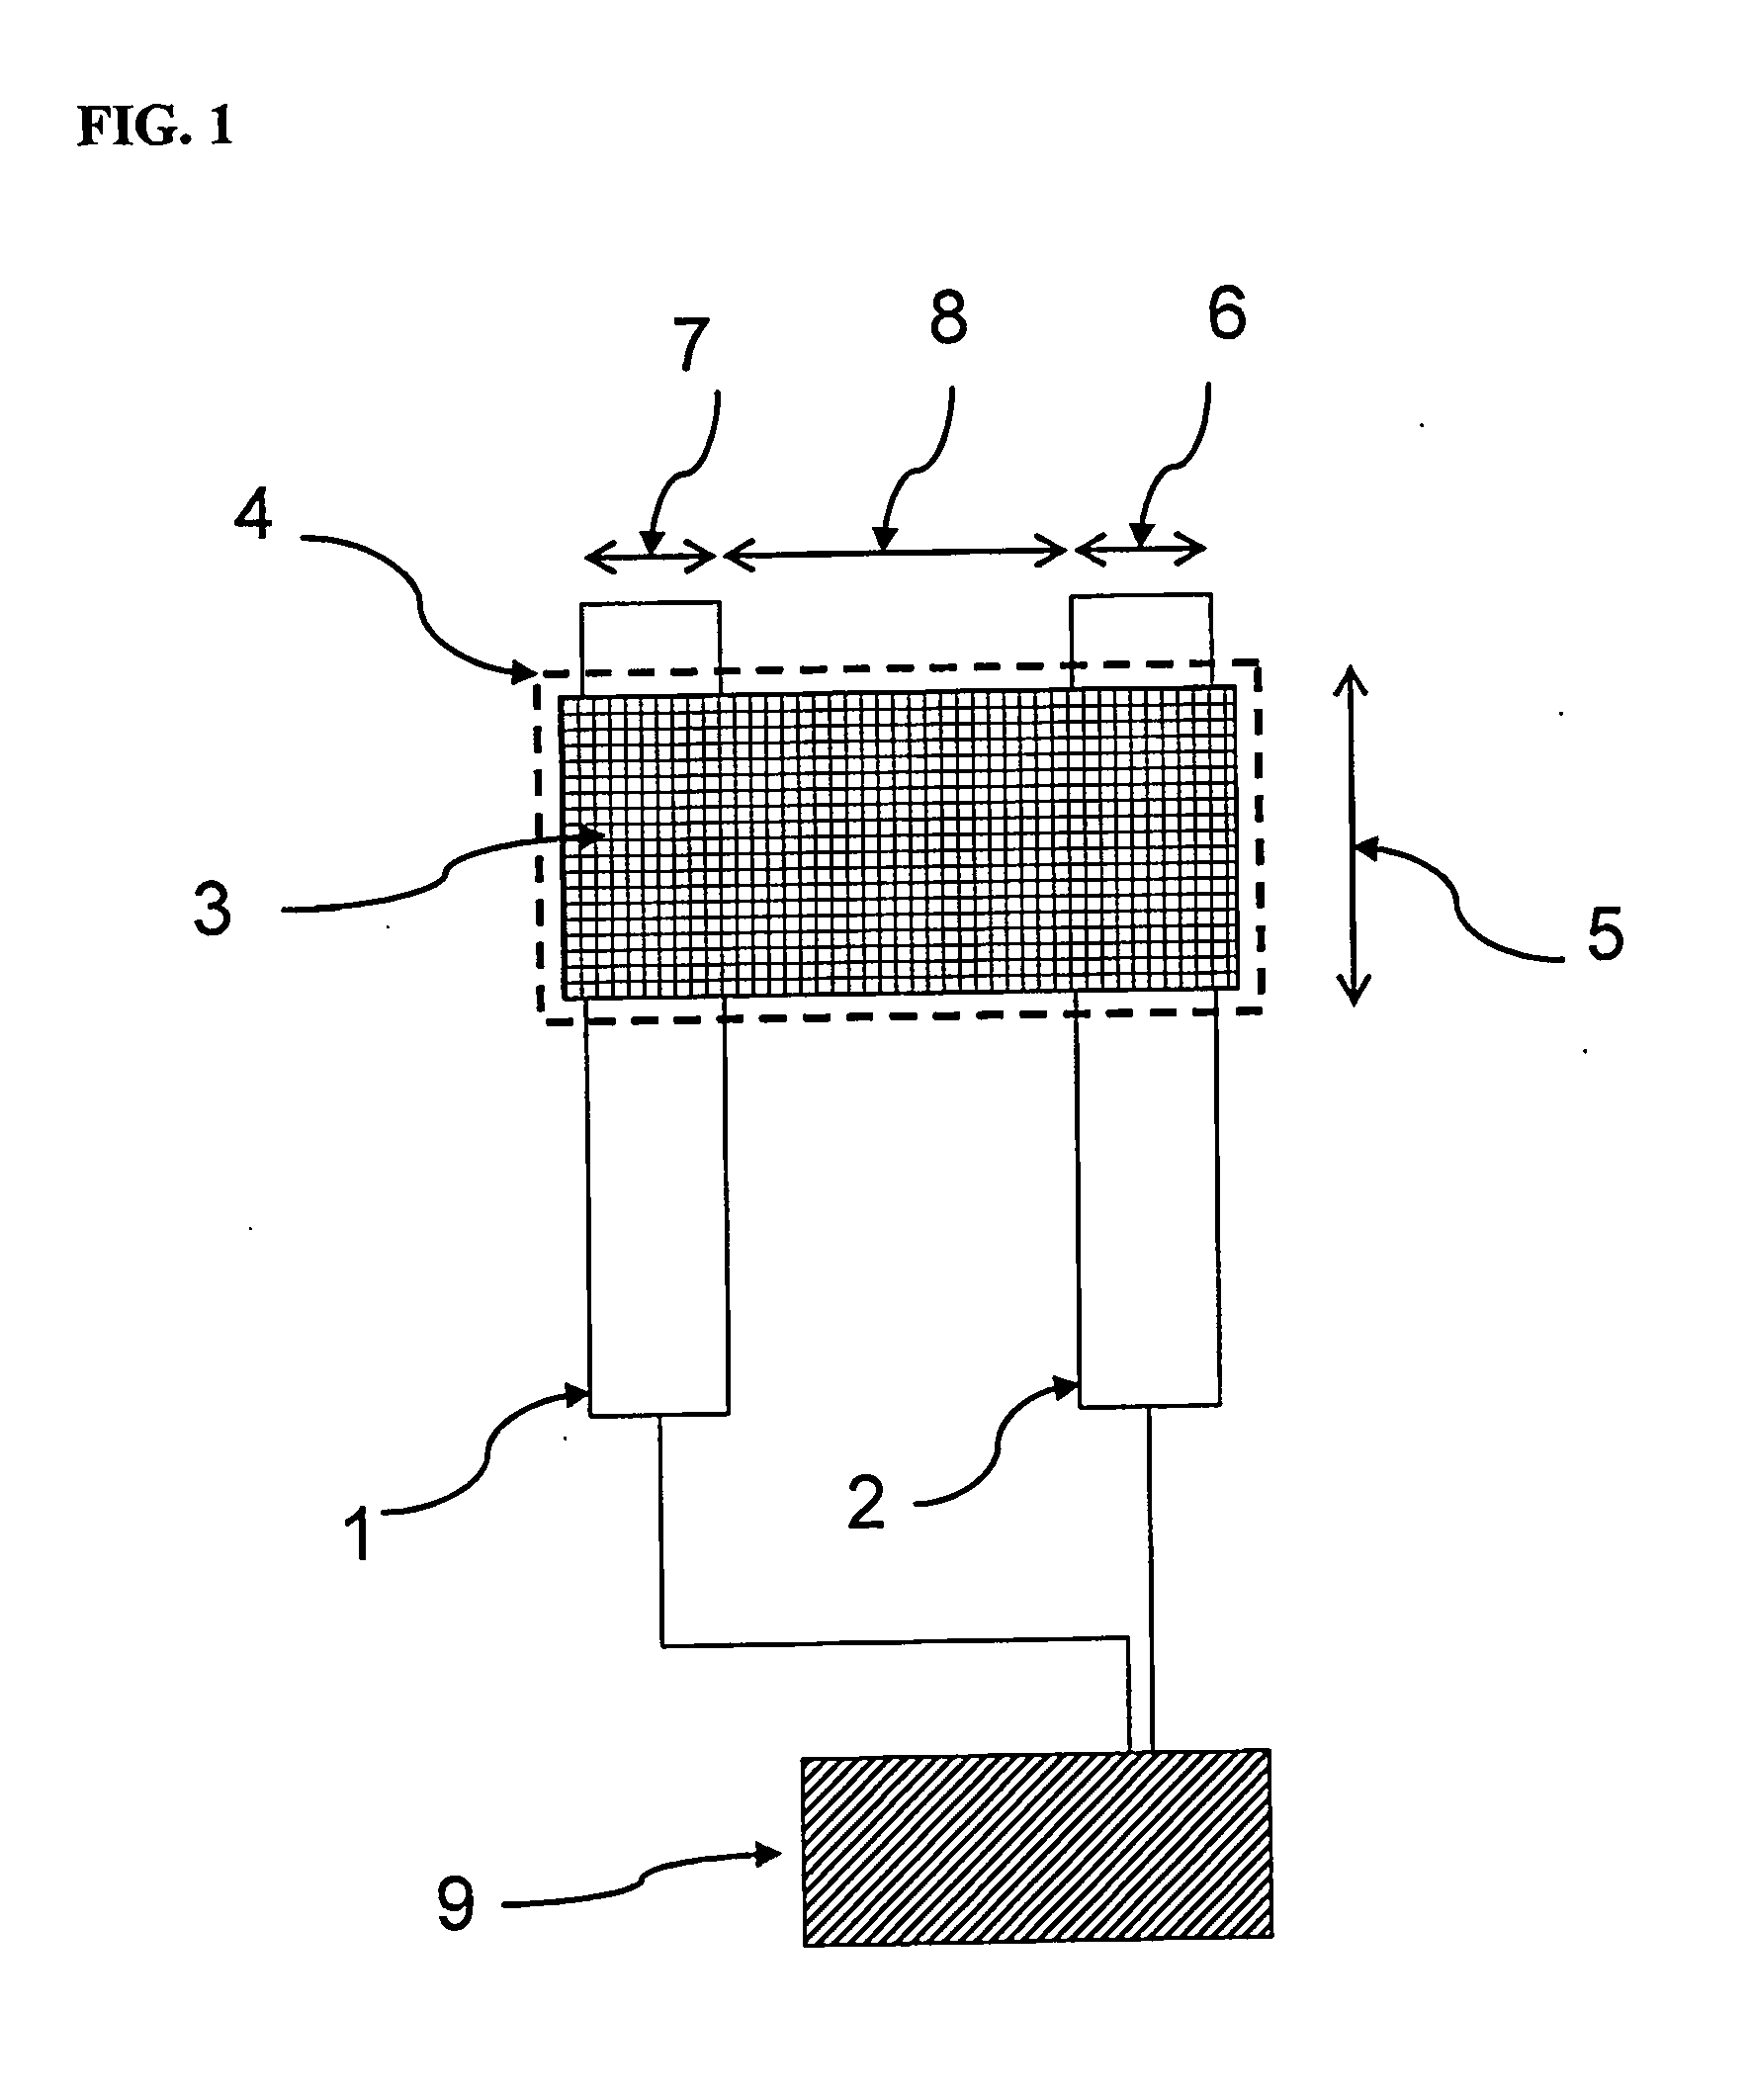 Method for determining the partition coefficient of an analyte